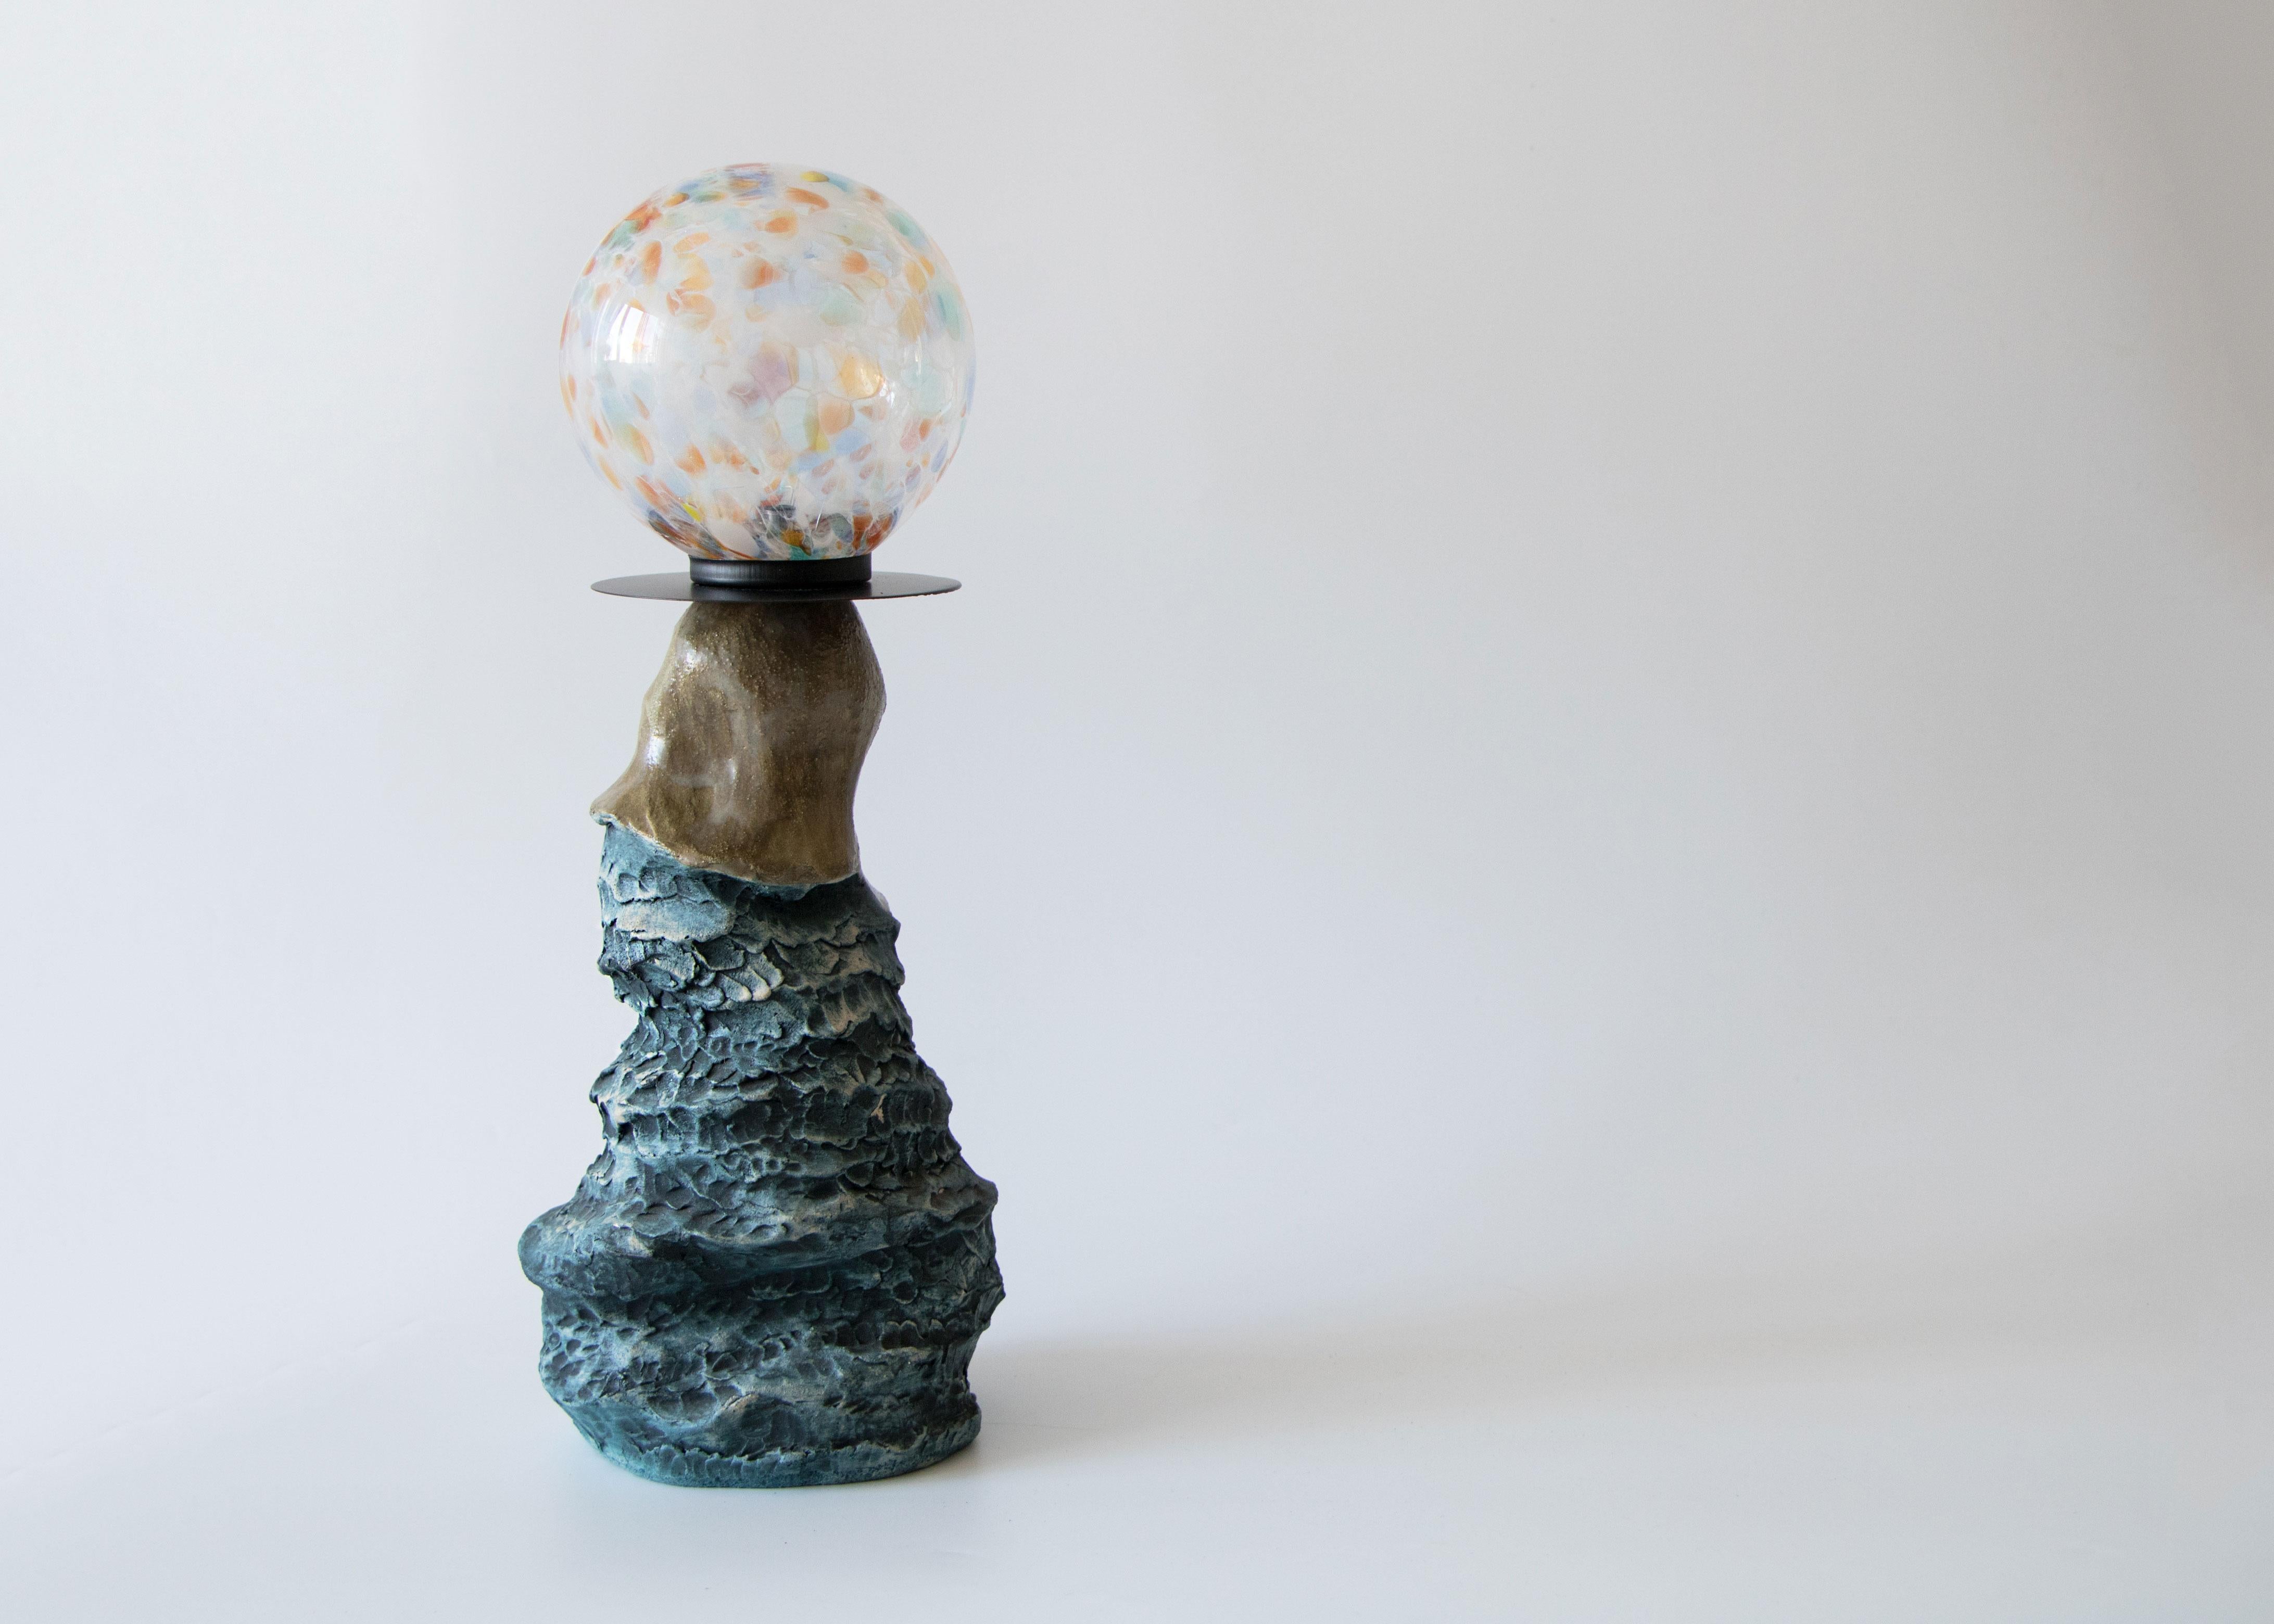 Abyss No 2 table lamp by Ceren Gurkan
Dimensions: D 15 x W 10 x H 35 cm
Materials: Ceramic, handblown glass.

All our lamps can be wired according to each country. If sold to the USA it will be wired for the USA for instance.

Ceren Gurkan is an